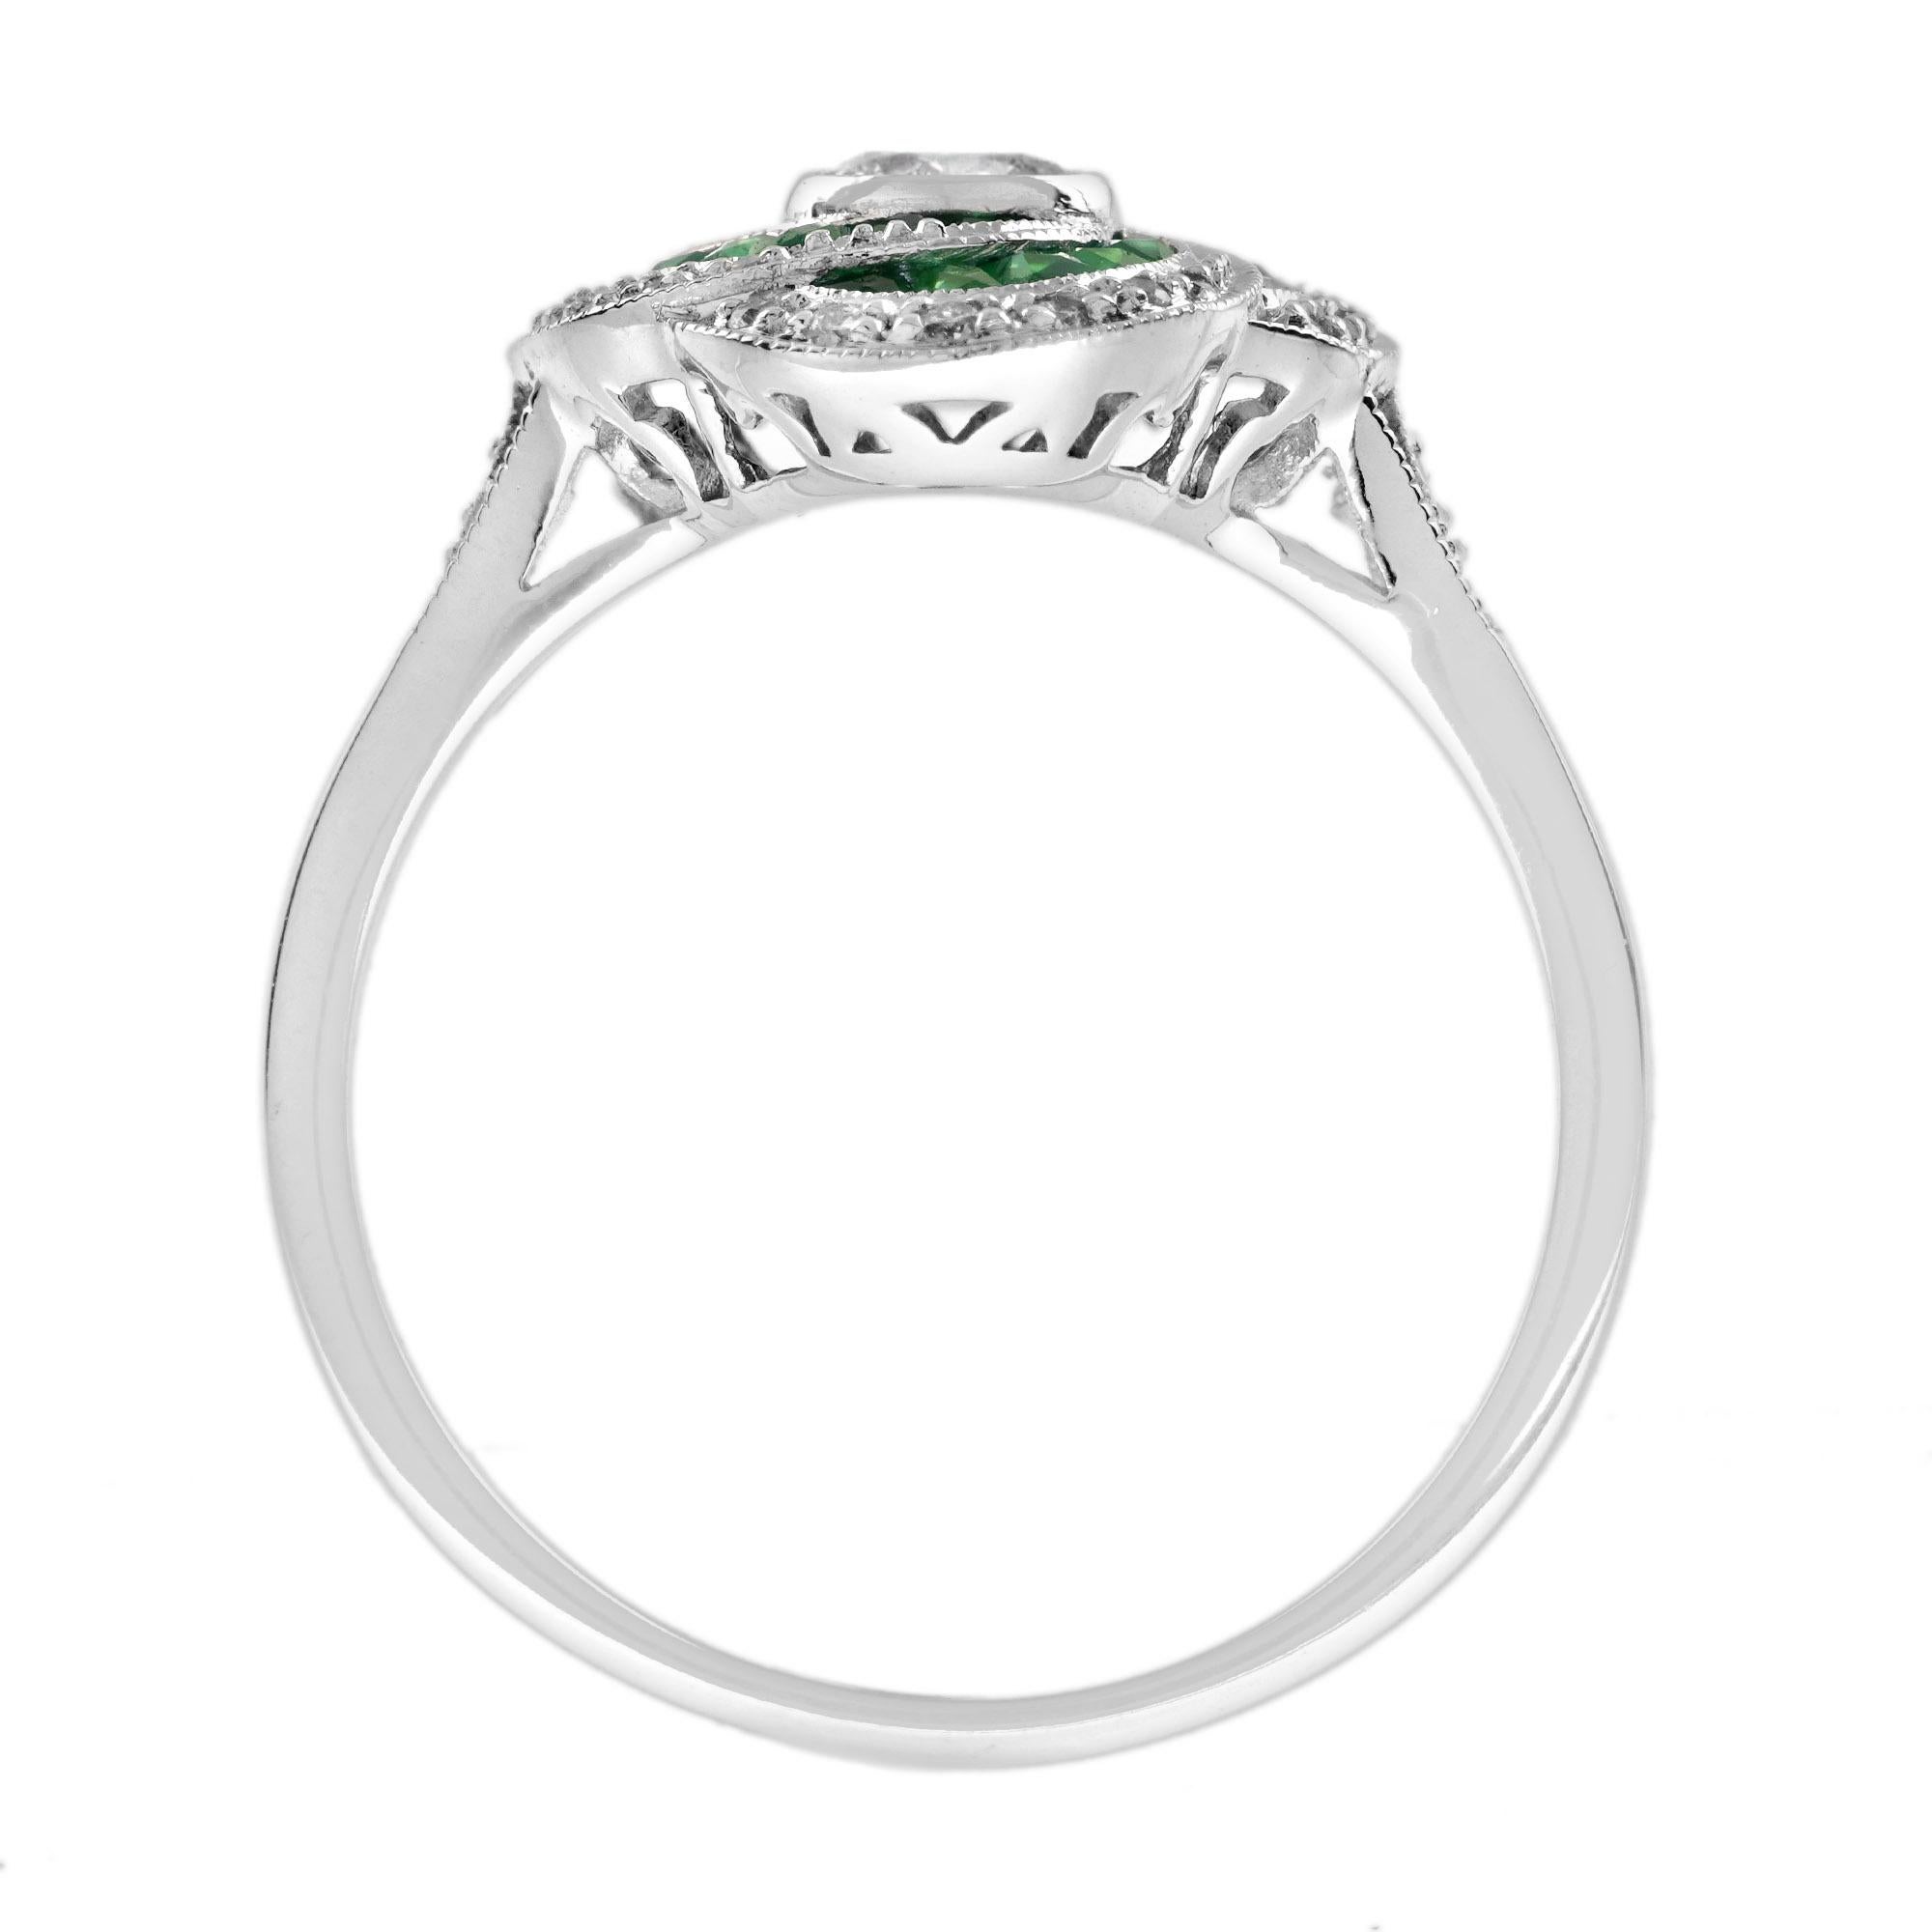 Diamond and Emerald Art Deco Style Swirling Engagement Ring in 18K White Gold For Sale 1